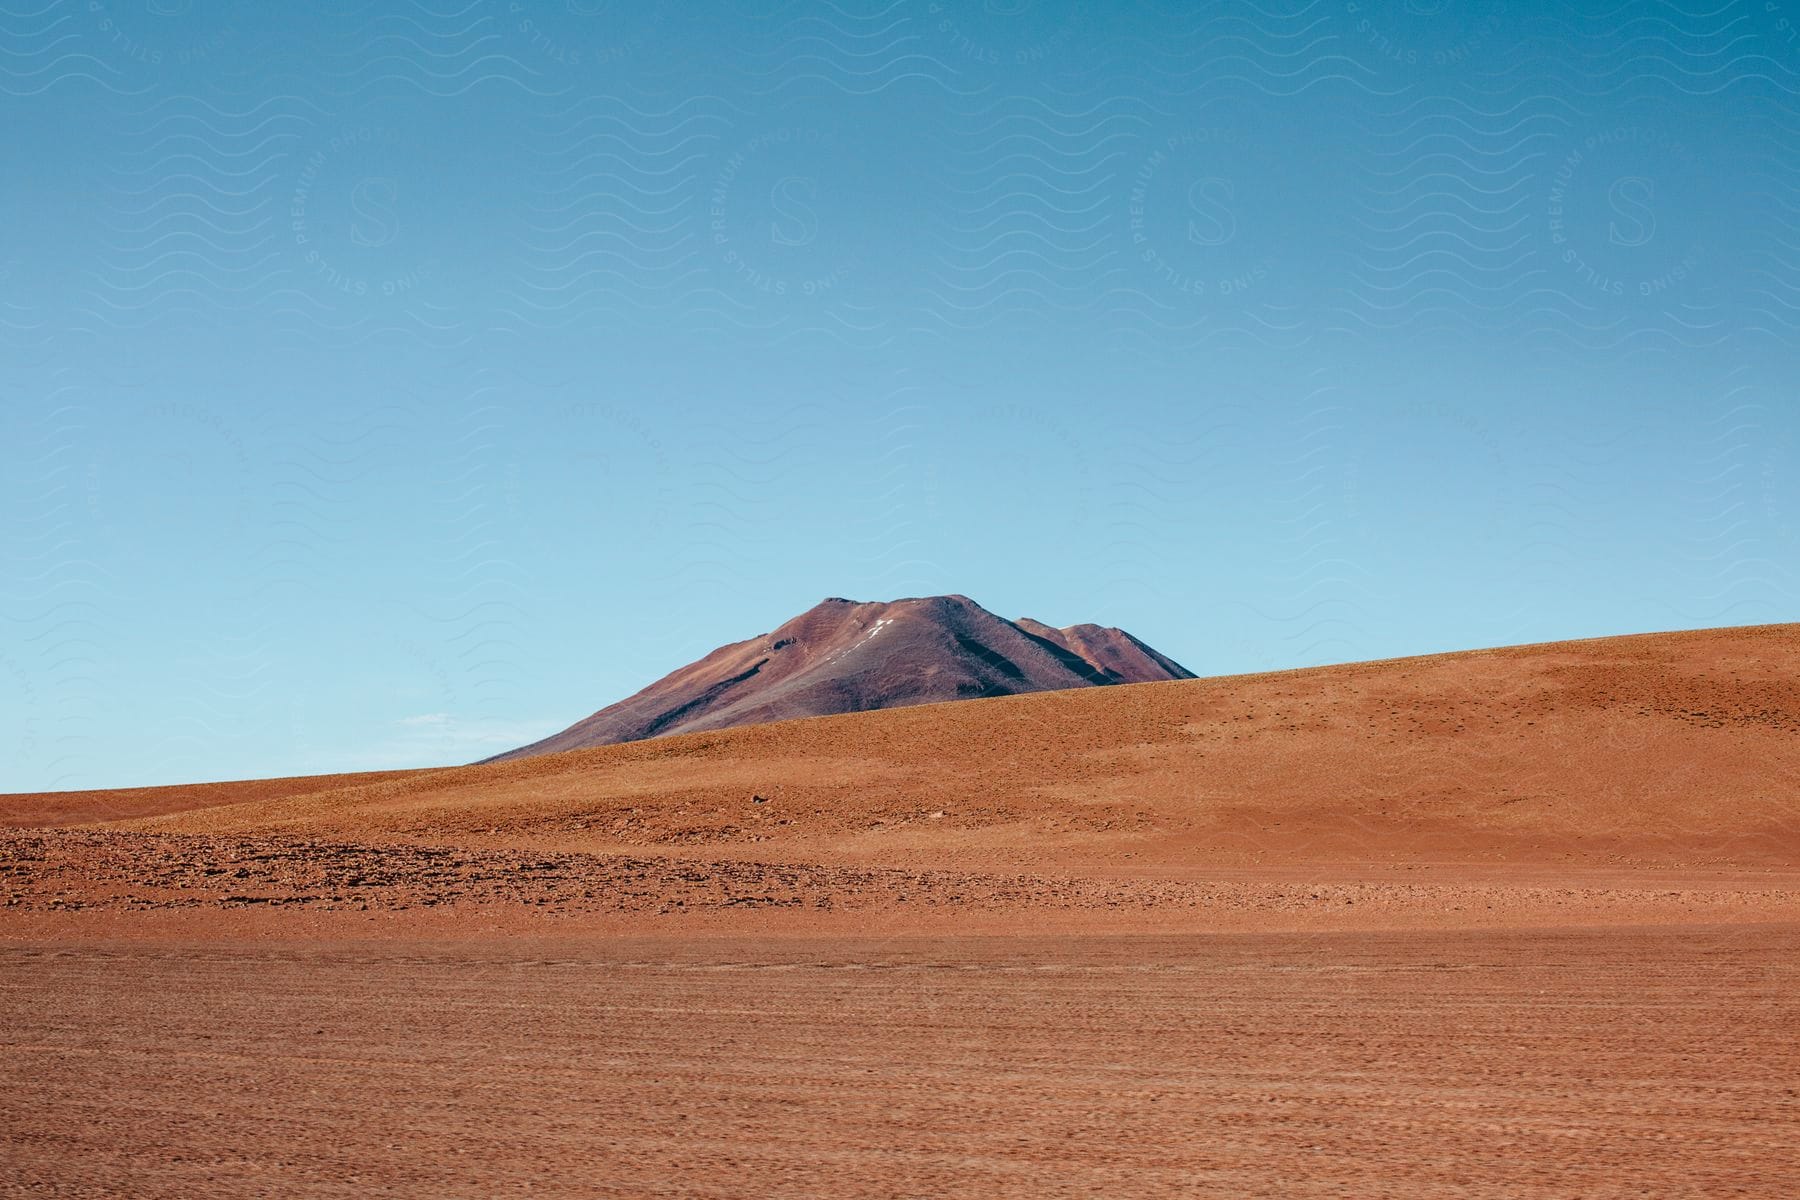 A sandy desert land with a mountain peak in the distance